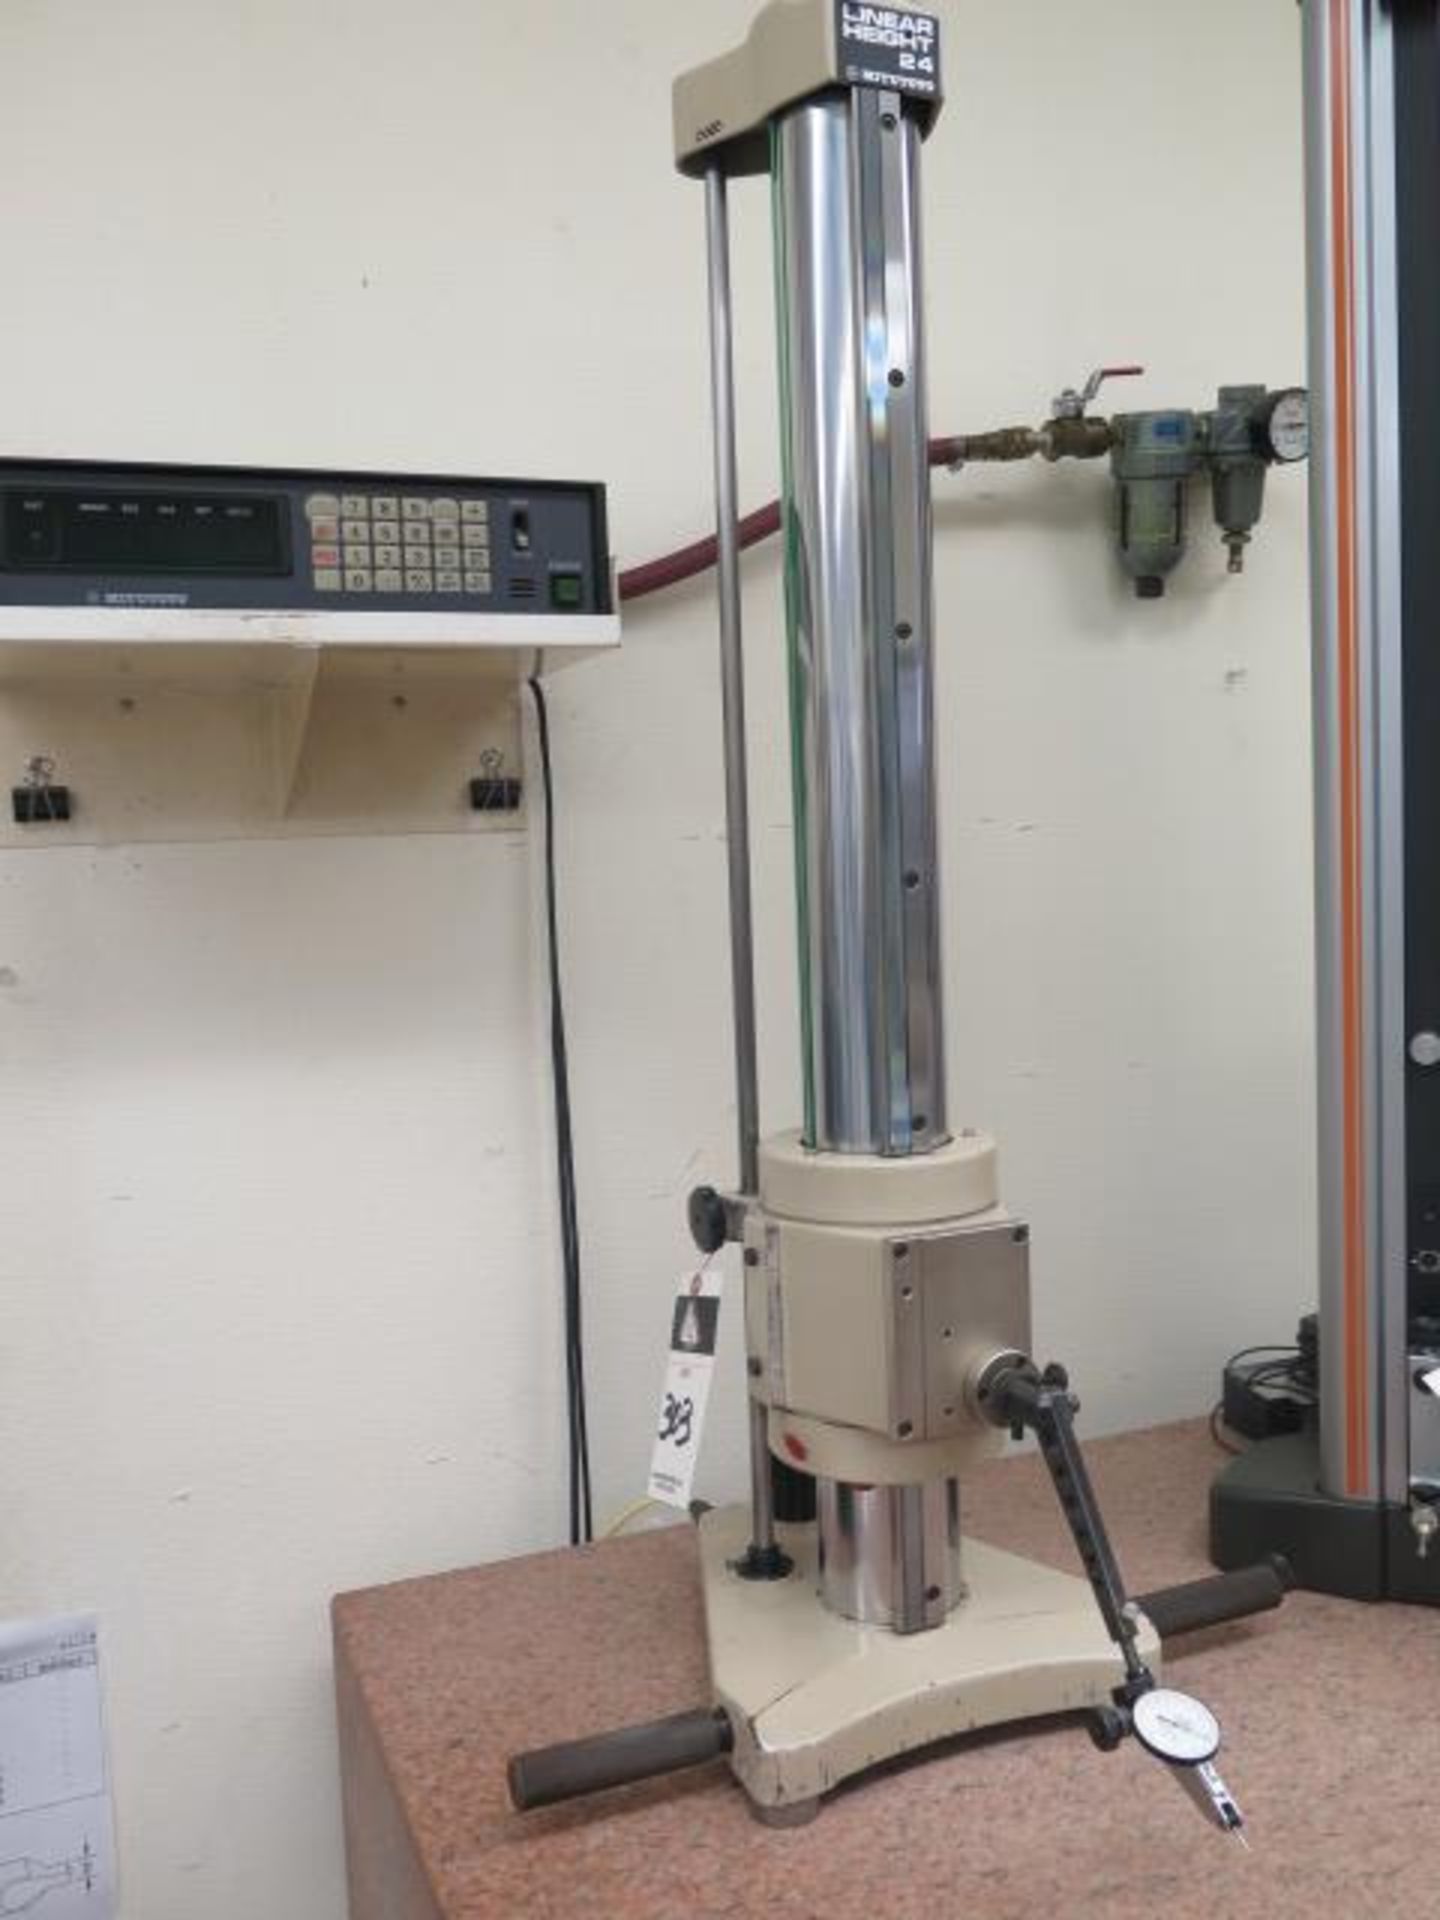 Mitutoyo Linear Height 24” Digital Height Gage w/ Mitutoyo DRO, Glass Scale, Pneumatic Air-Glide - Image 2 of 5